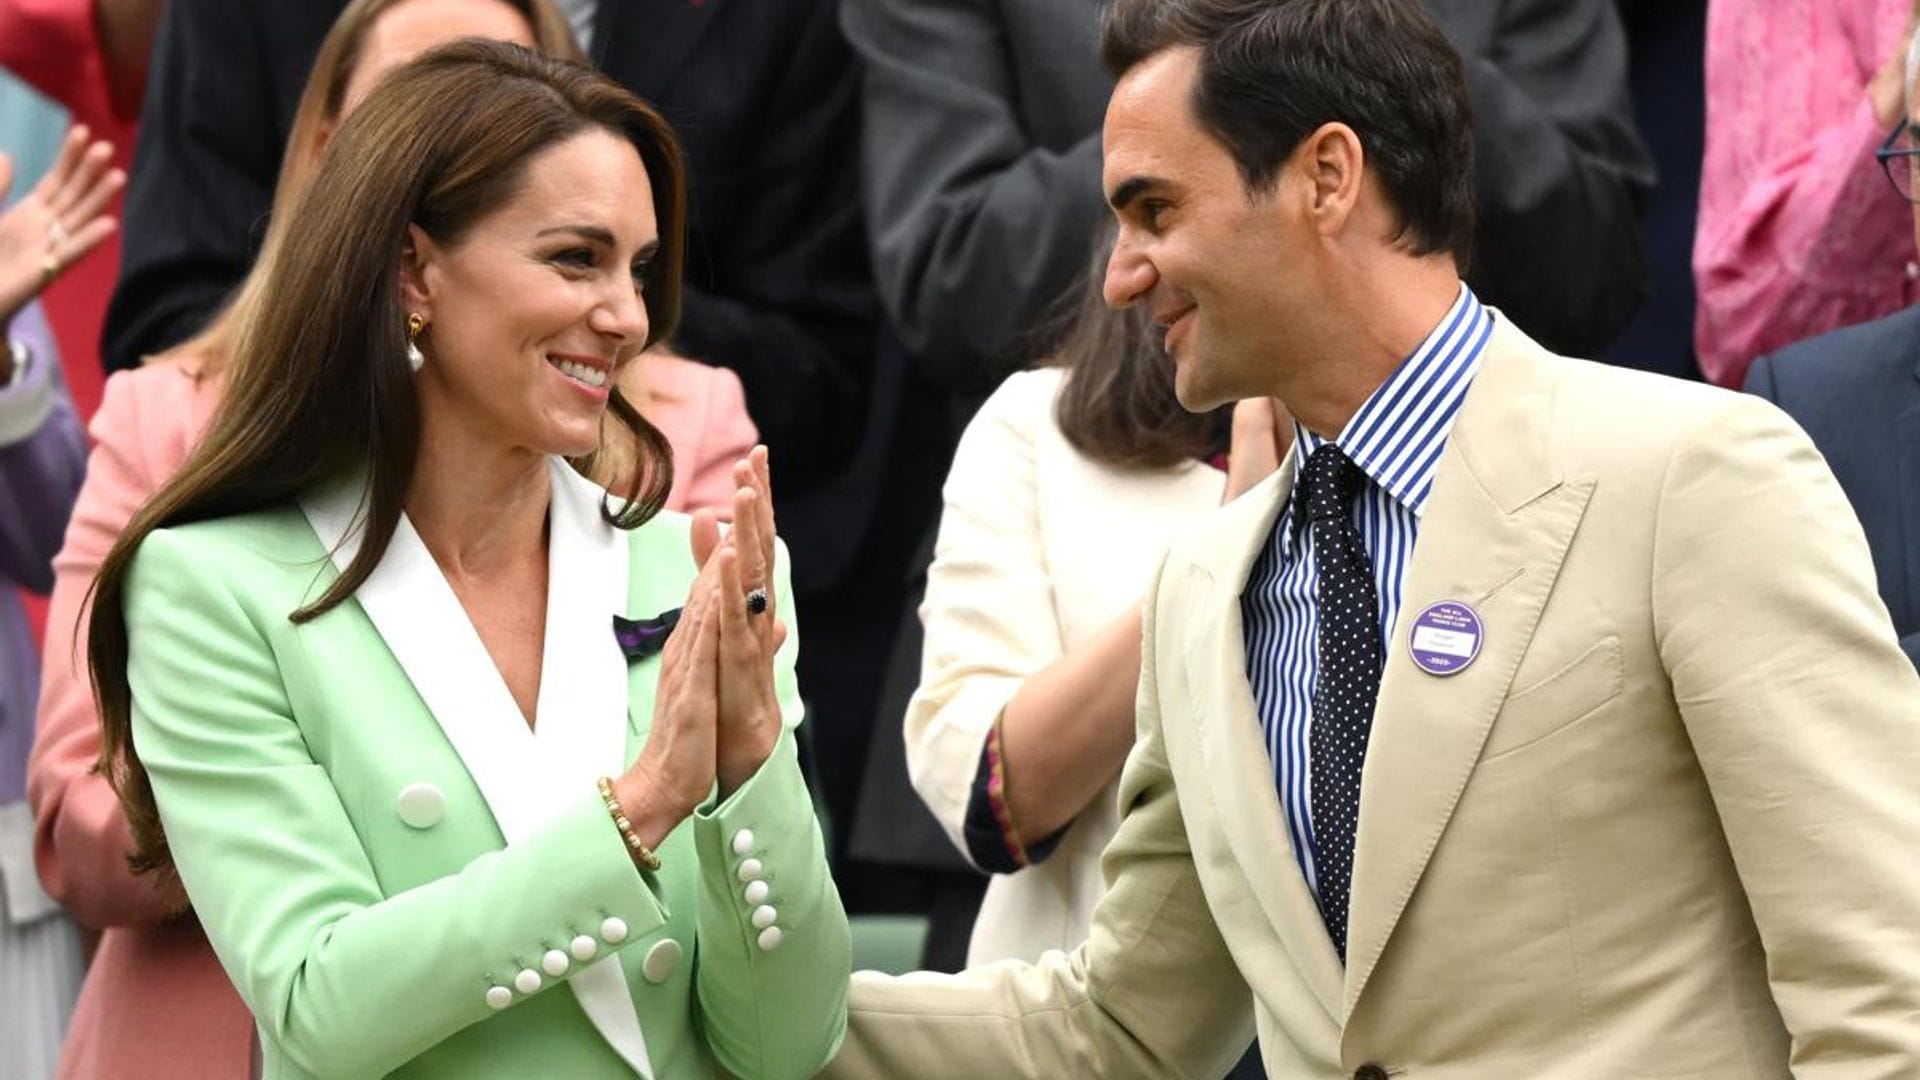 What Roger Federer had to say about sitting in the Royal Box with the Princess of Wales